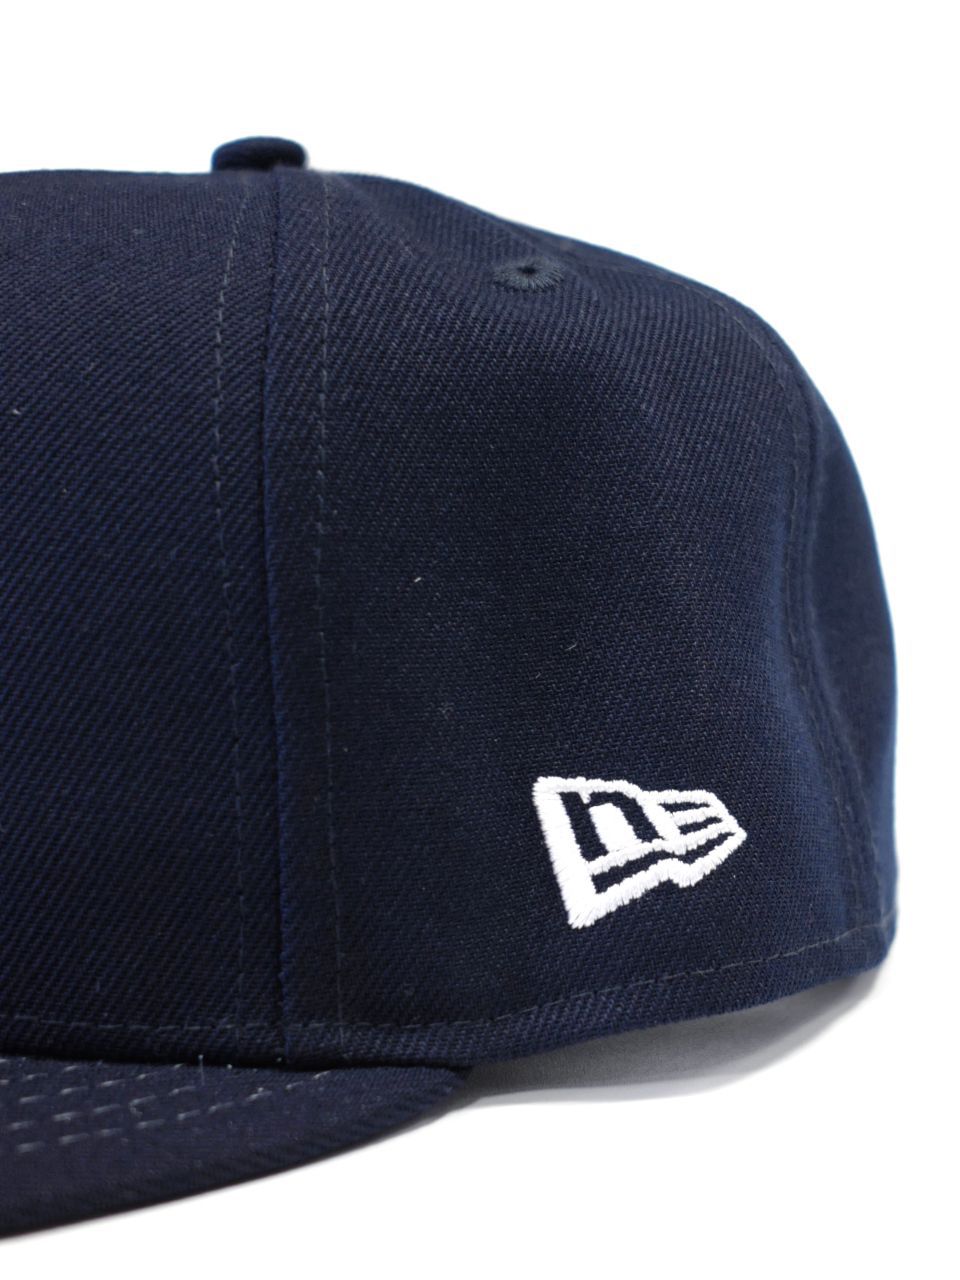 COOTIE PRODUCTIONS - Low Profile 59FIFTY (NAVY) / ニューエラ 